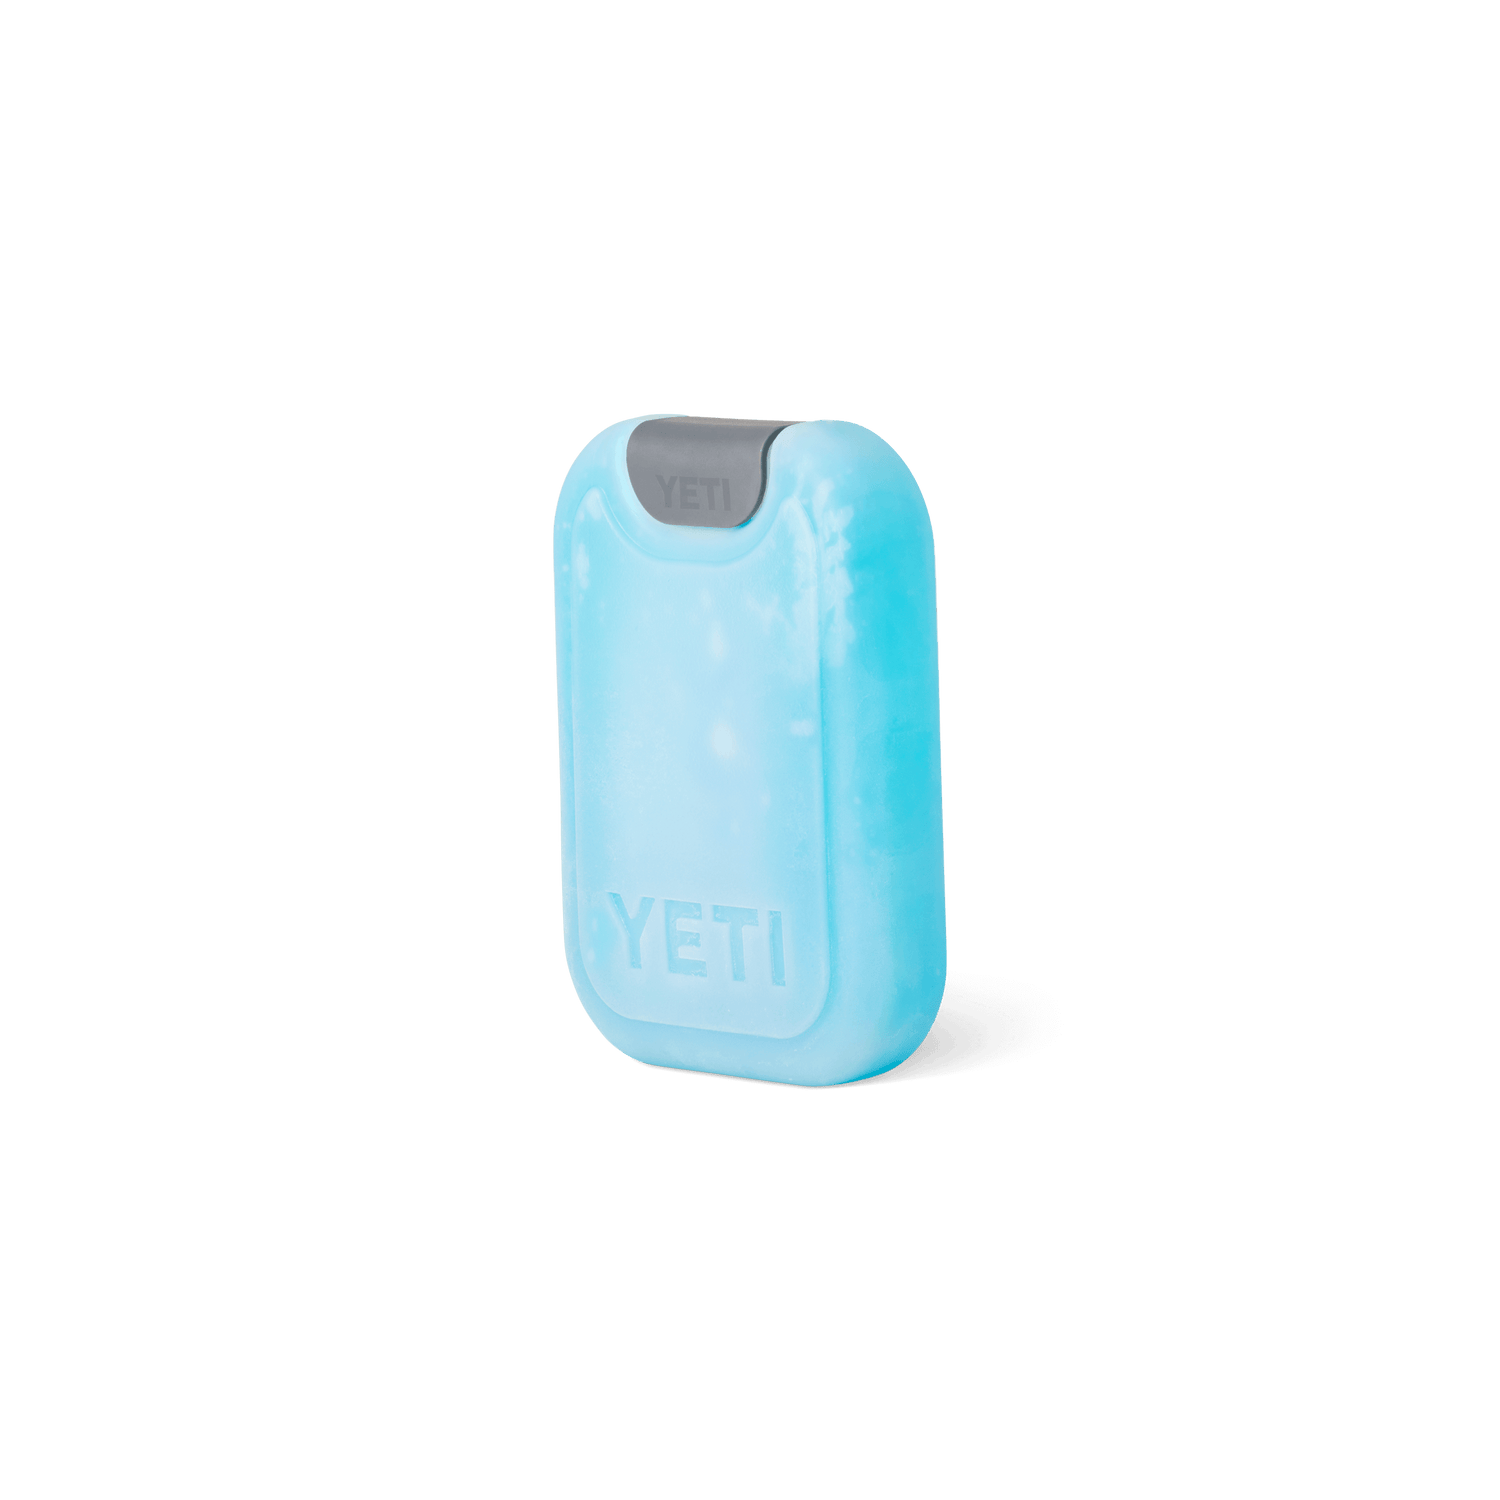 YETI: New YETI Thin Ice: Go Ahead And Pack It In